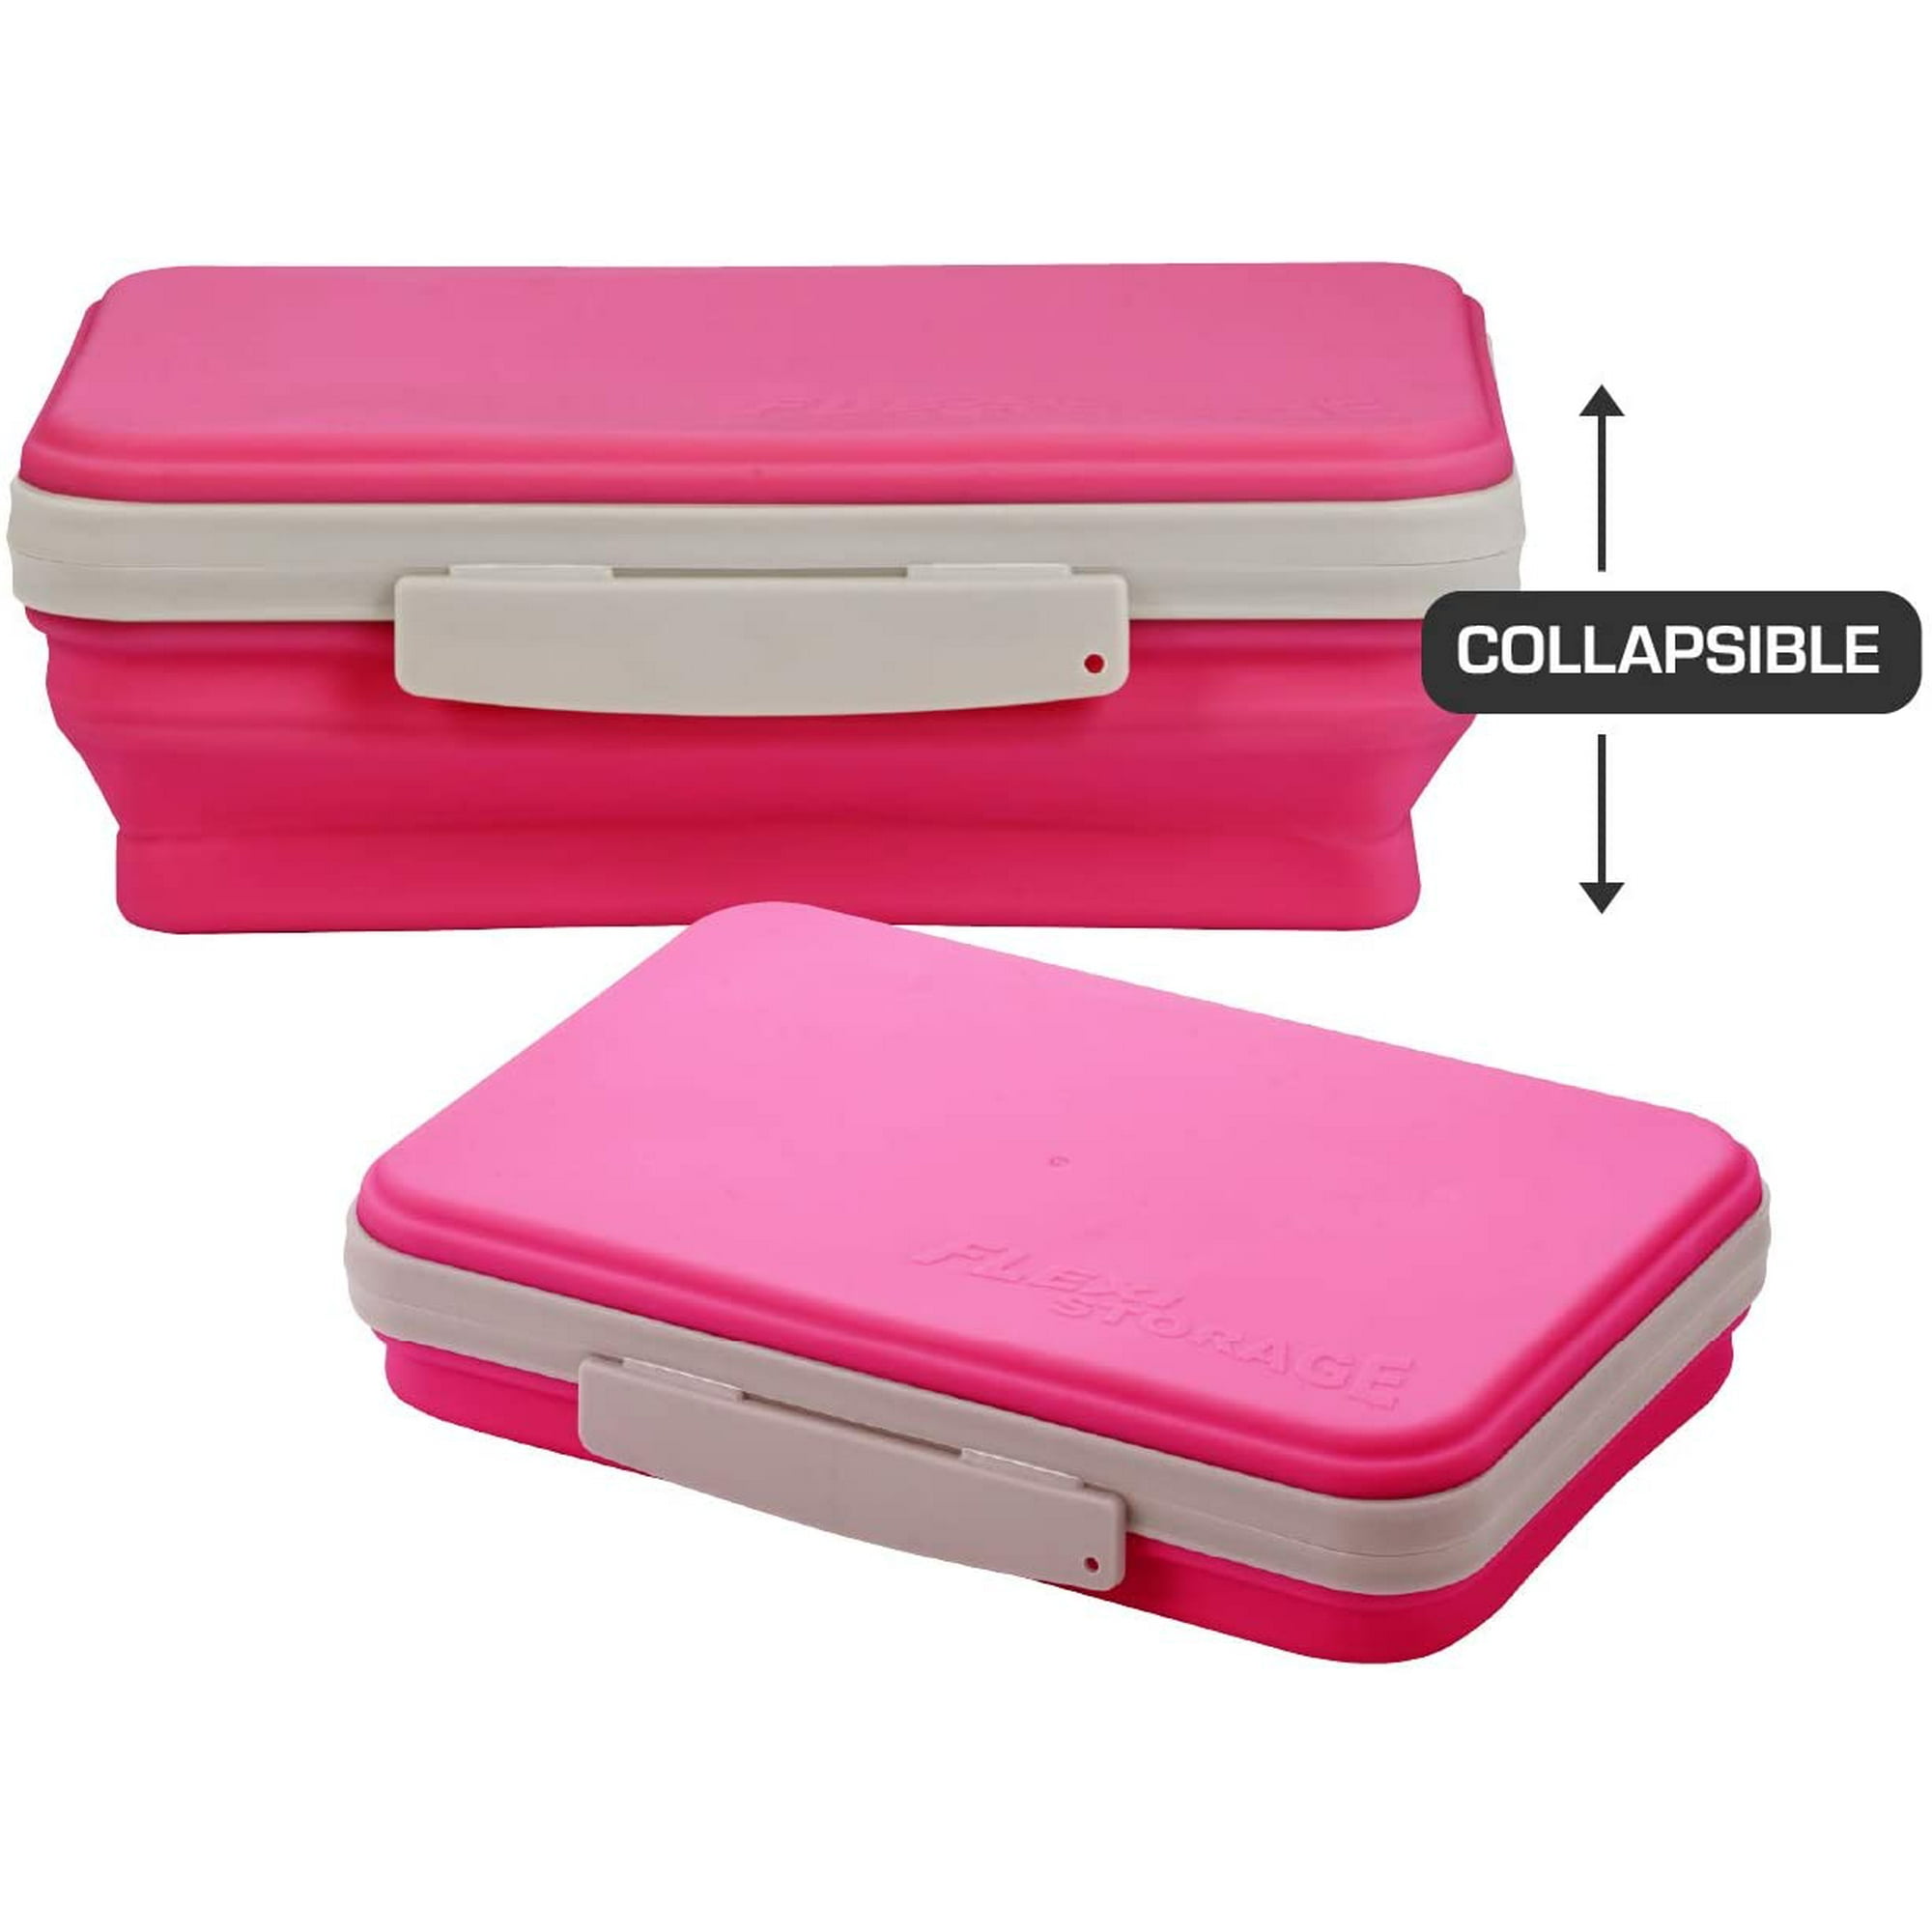 It's Academic Flexi Storage Box with Lid, Collapsible Pencil Case Design for Craft and School Supplies, Pink/Gray